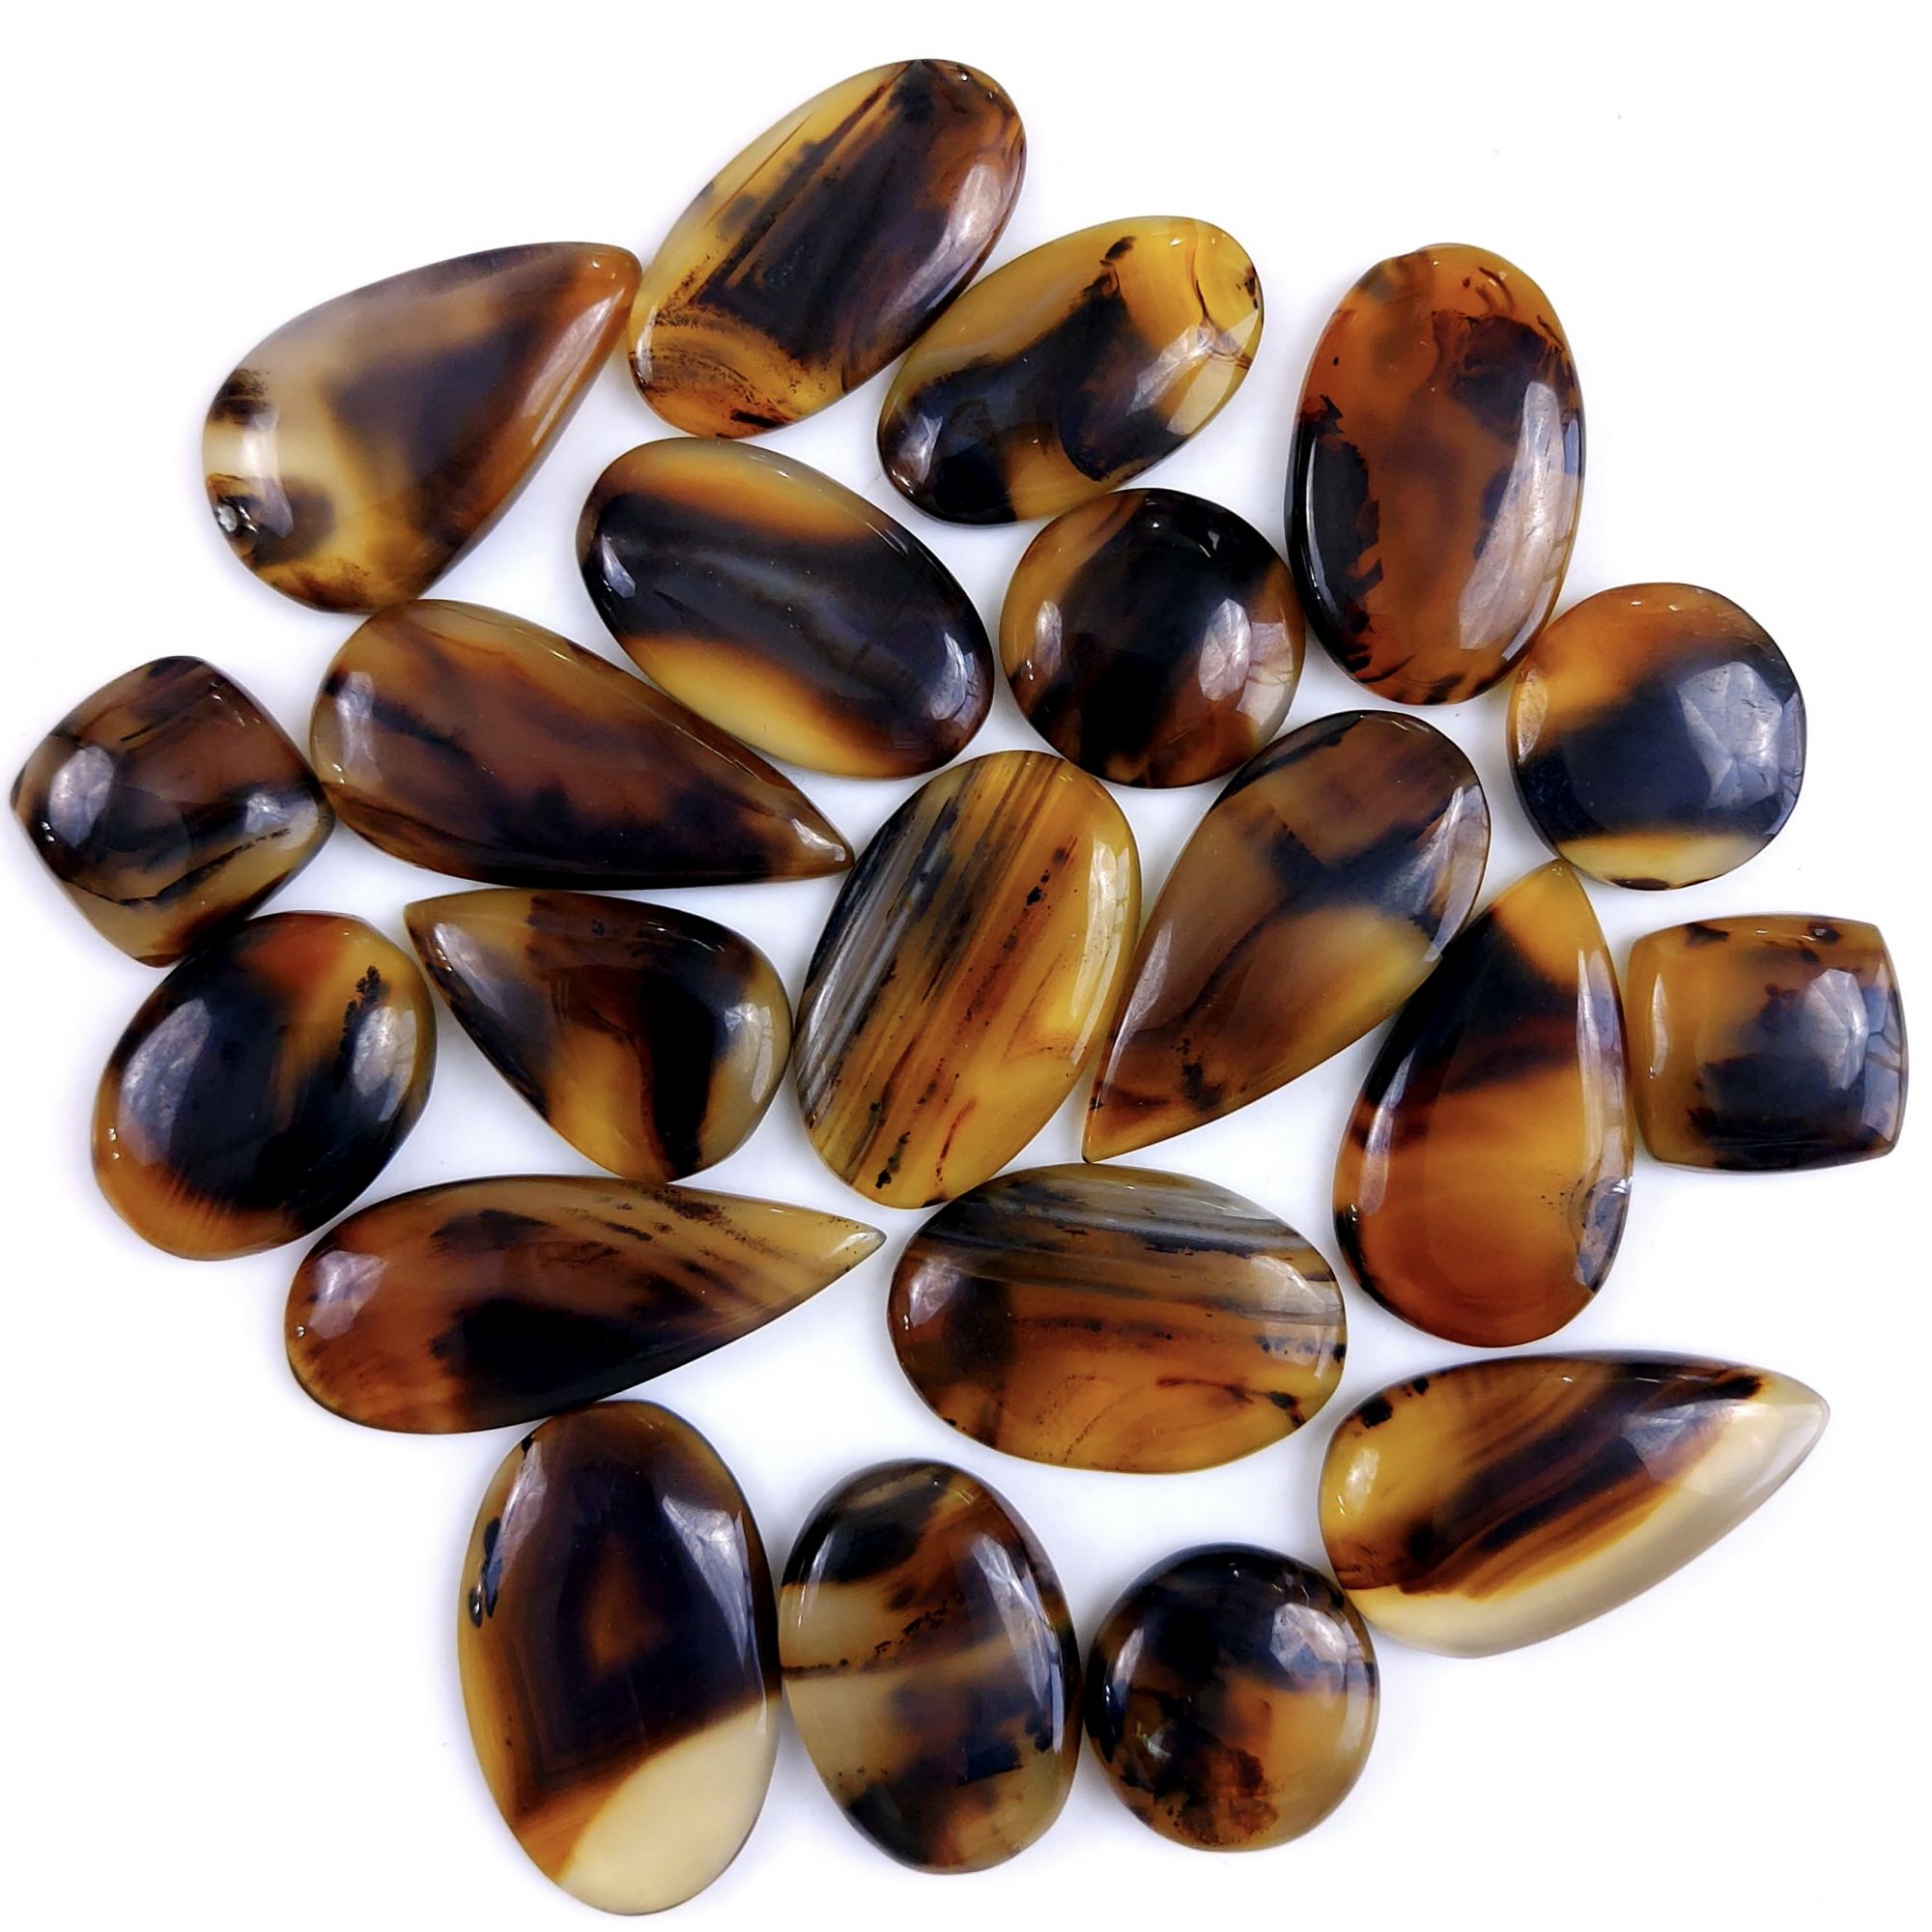 26Pcs 558Cts Natural Montana Agate Cabochon Lot Brown Flat Back Gemstone Crystal Wholesale Loose gemstone For Jewelry Making 35x25 22x14mm